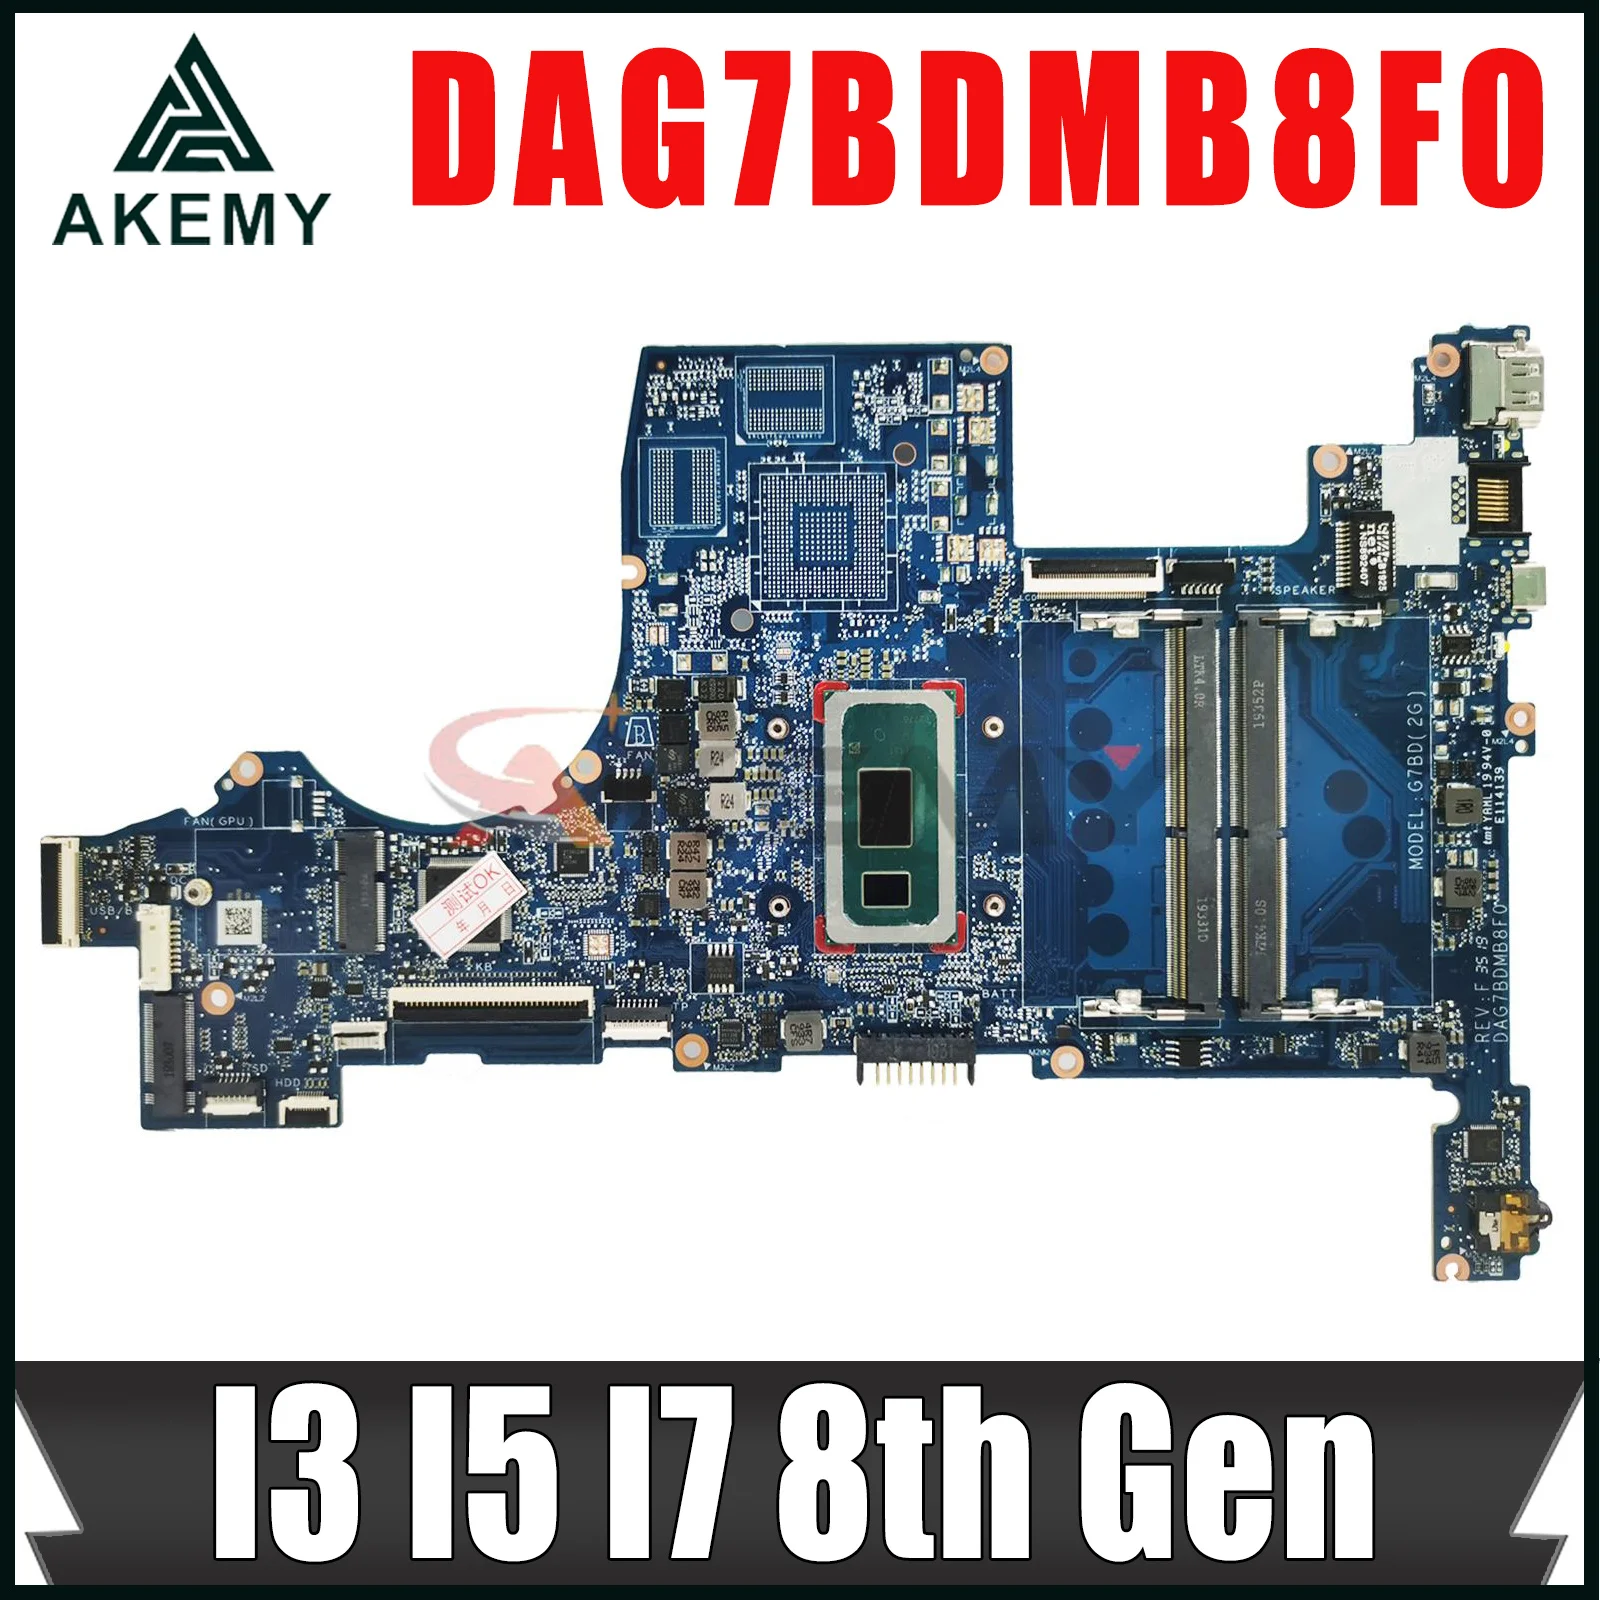 

For HP Pavilion 15T-CS 15-CS Motherboard Mainboard Laptop Motherboard With I3 I5 I7 8th Gen CPU DAG7BDMB8F0